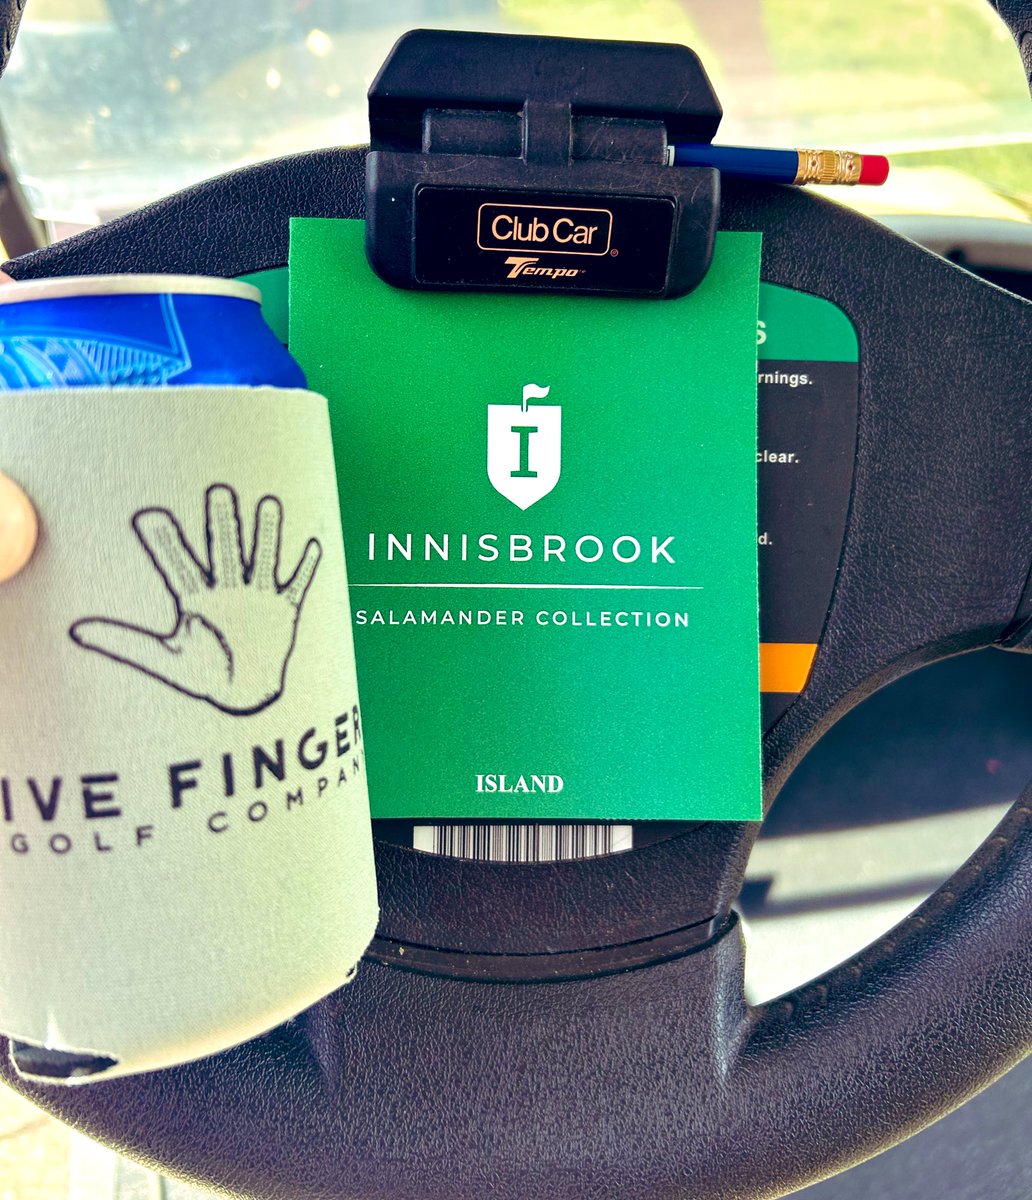 Where is FFGC? One of our Brand Ambassadors played the Island course at @Innisbrook, in Palm Harbor, Florida. Well played, John!
fivefingersgolfcompany.com